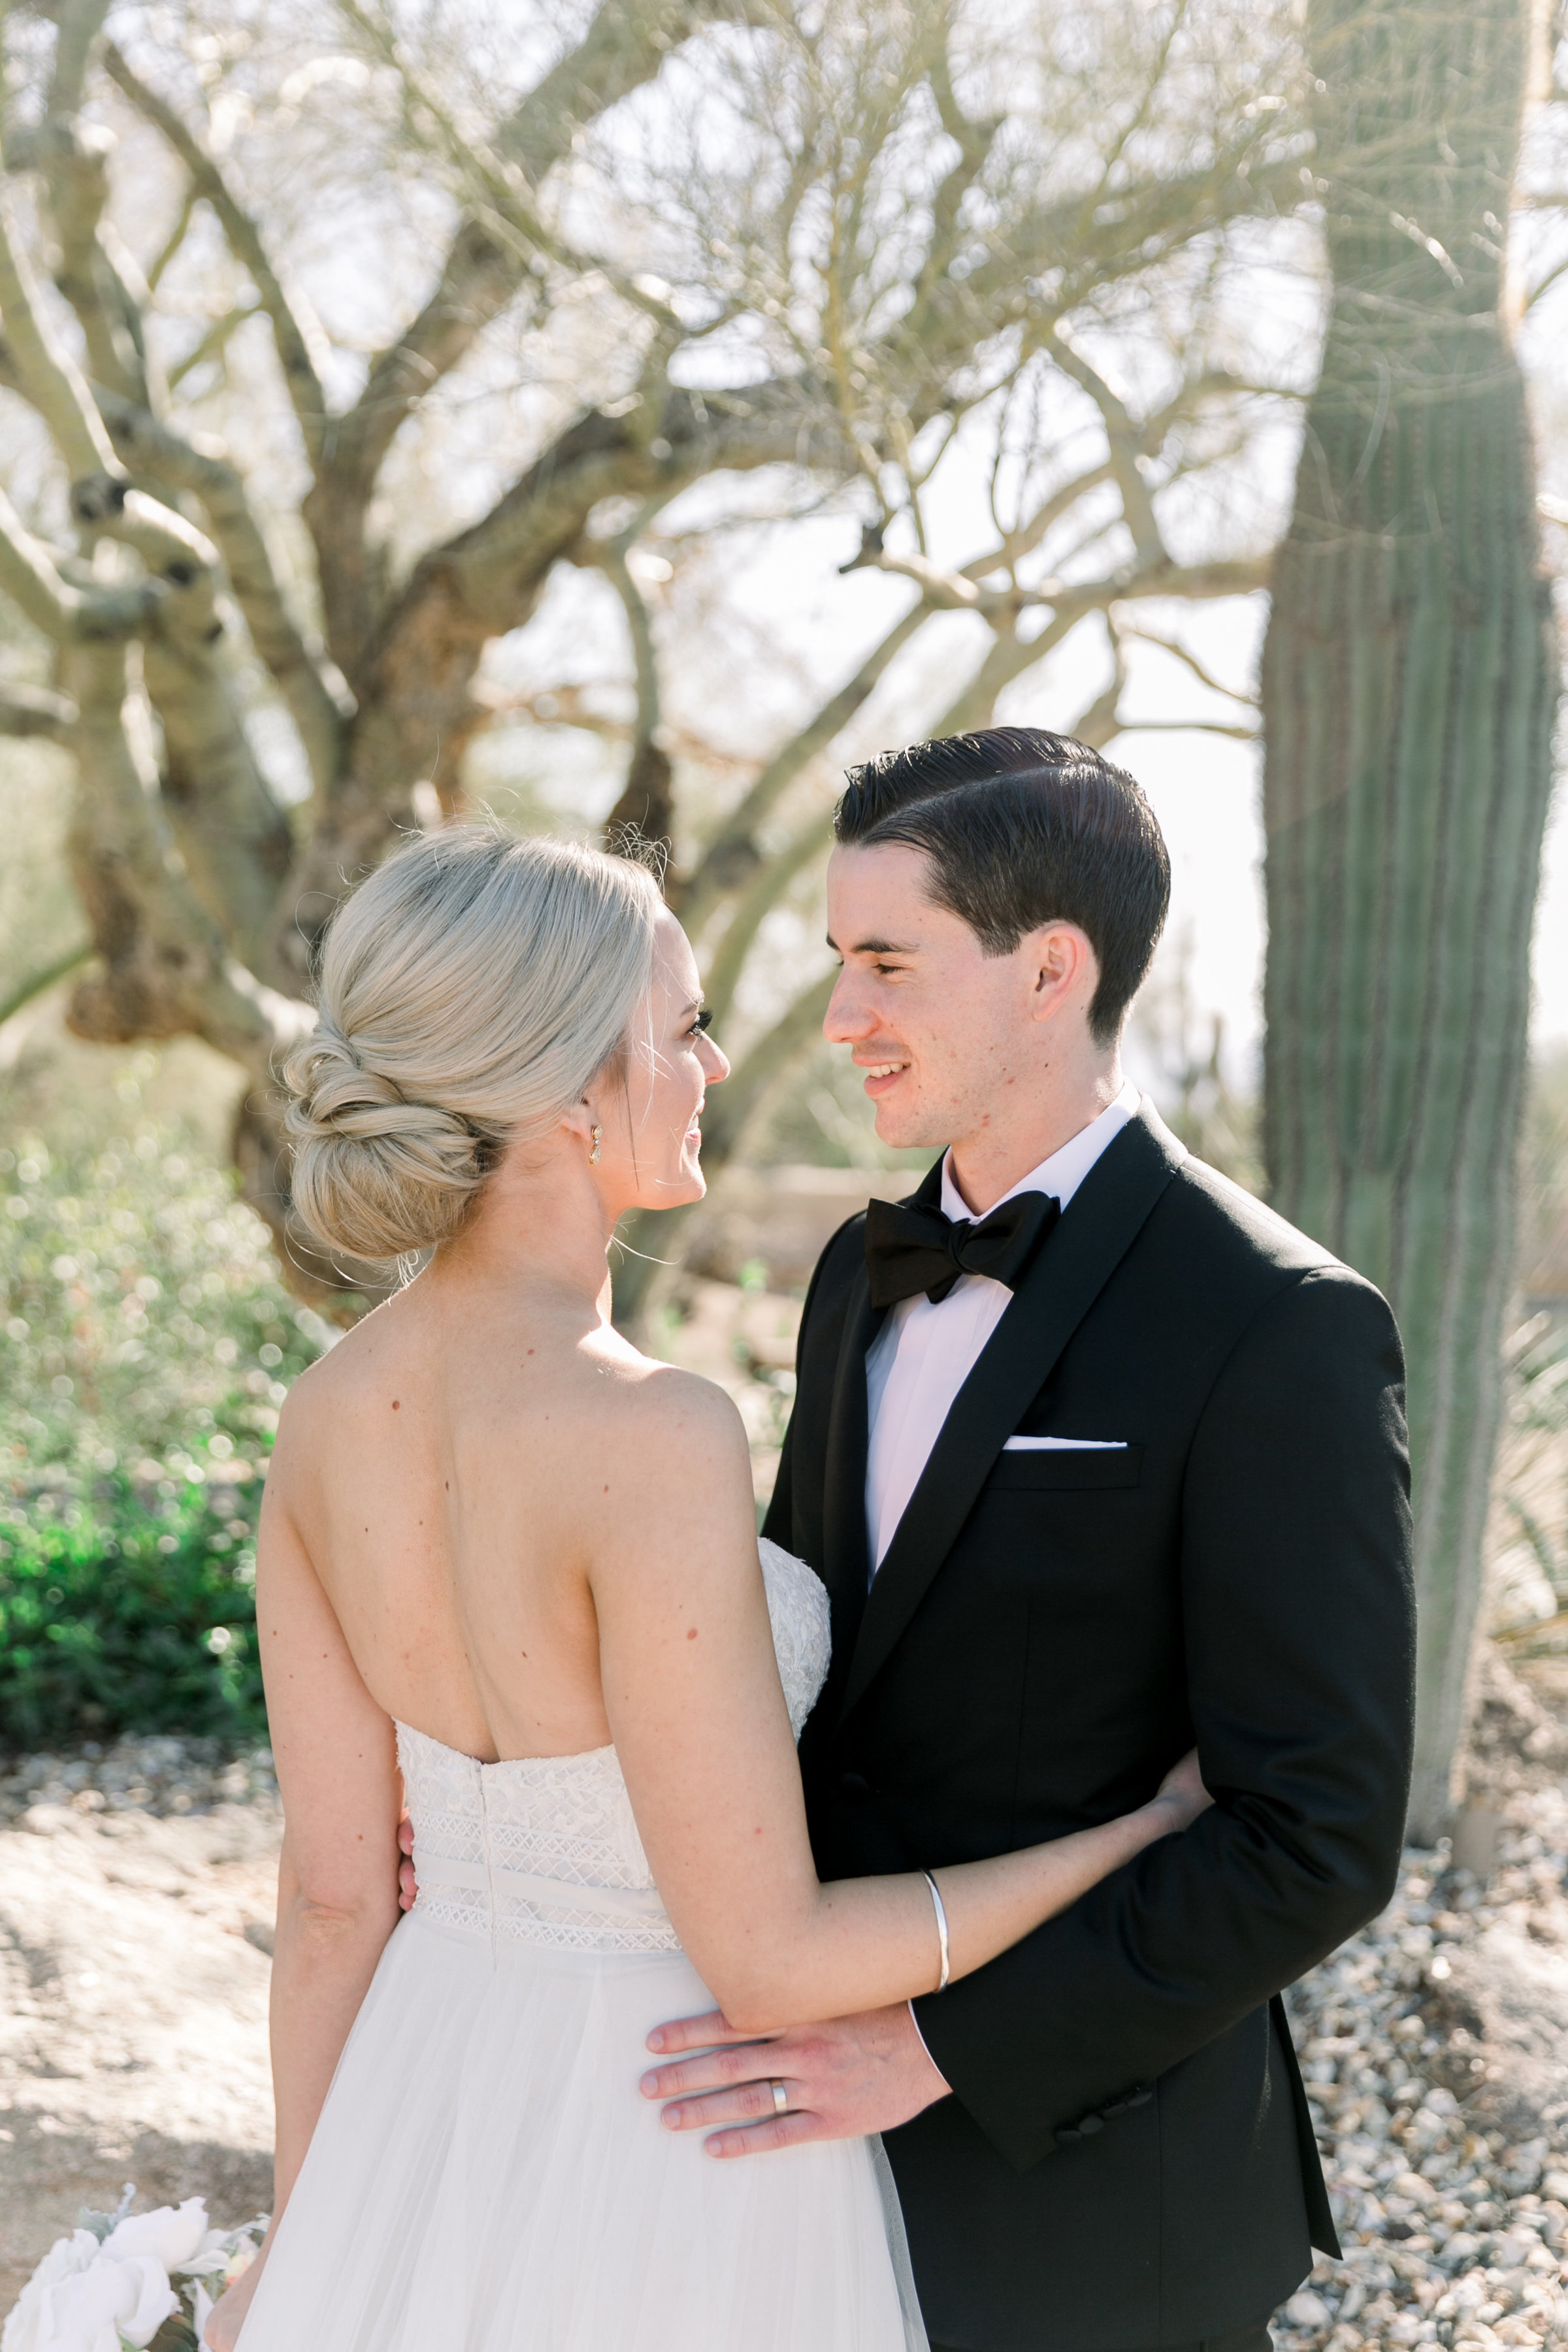 Karlie Colleen Photography - Arizona Wedding at The Troon Scottsdale Country Club - Paige & Shane -213